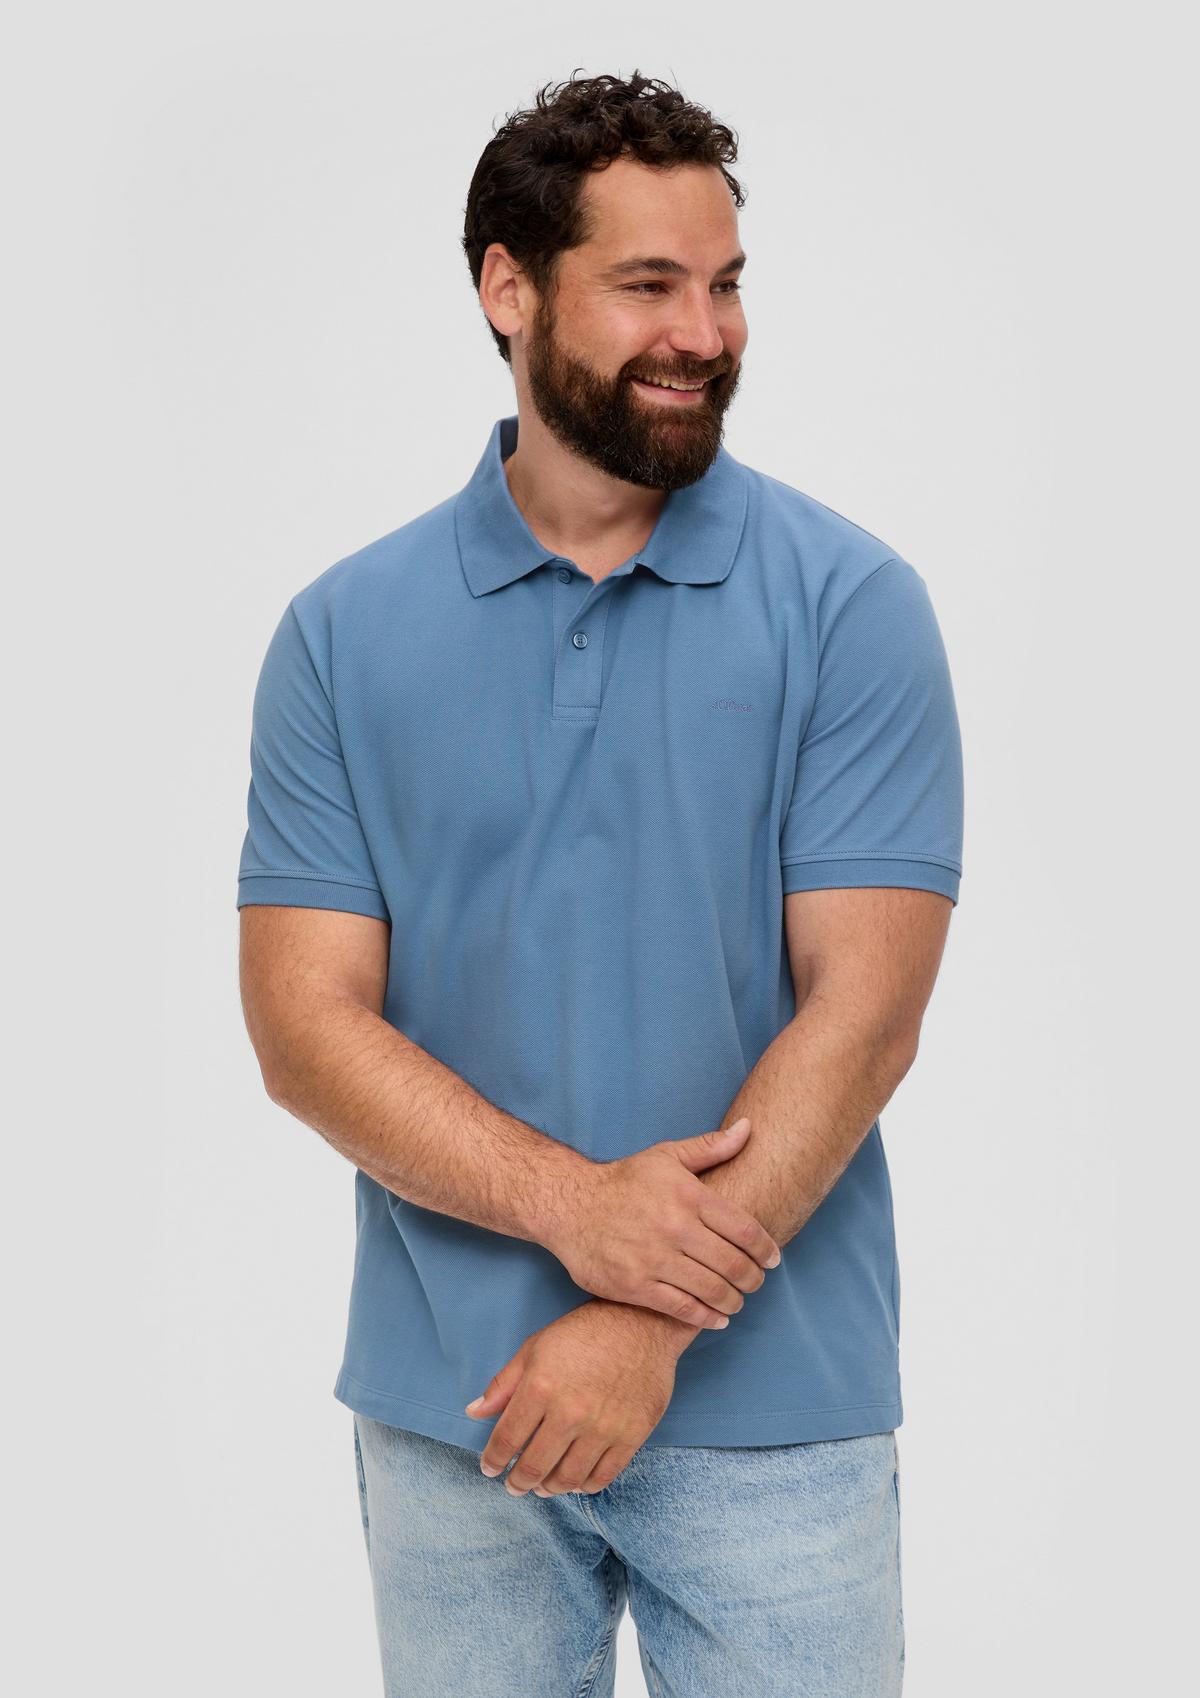 Shirts for Men Polo